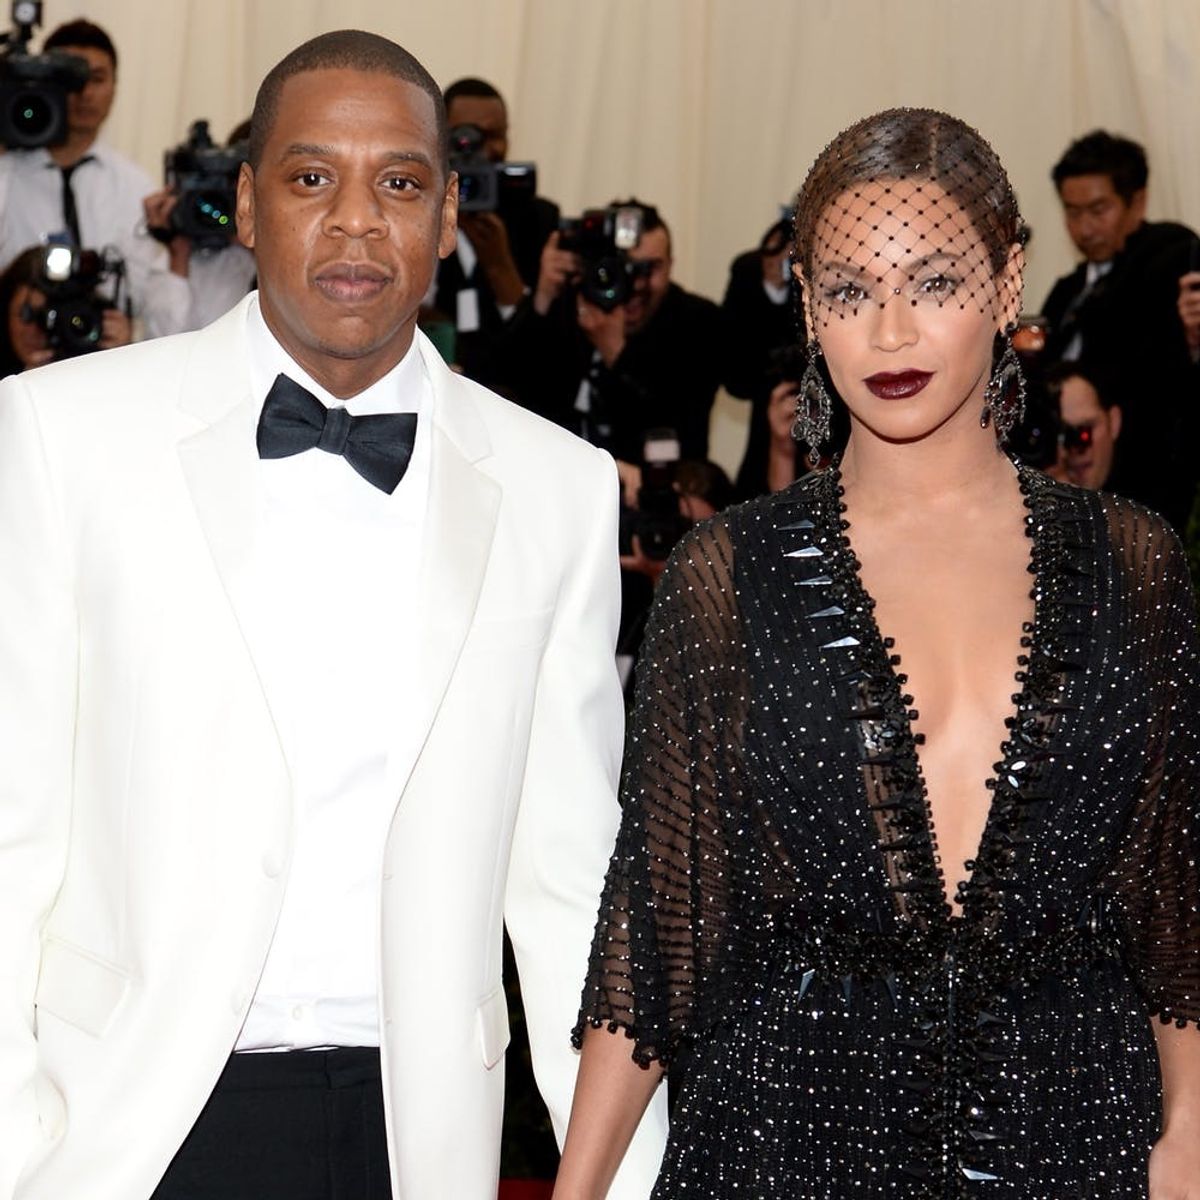 Beyoncé and JAY-Z’s ‘OTR II’ Tour Is Official!